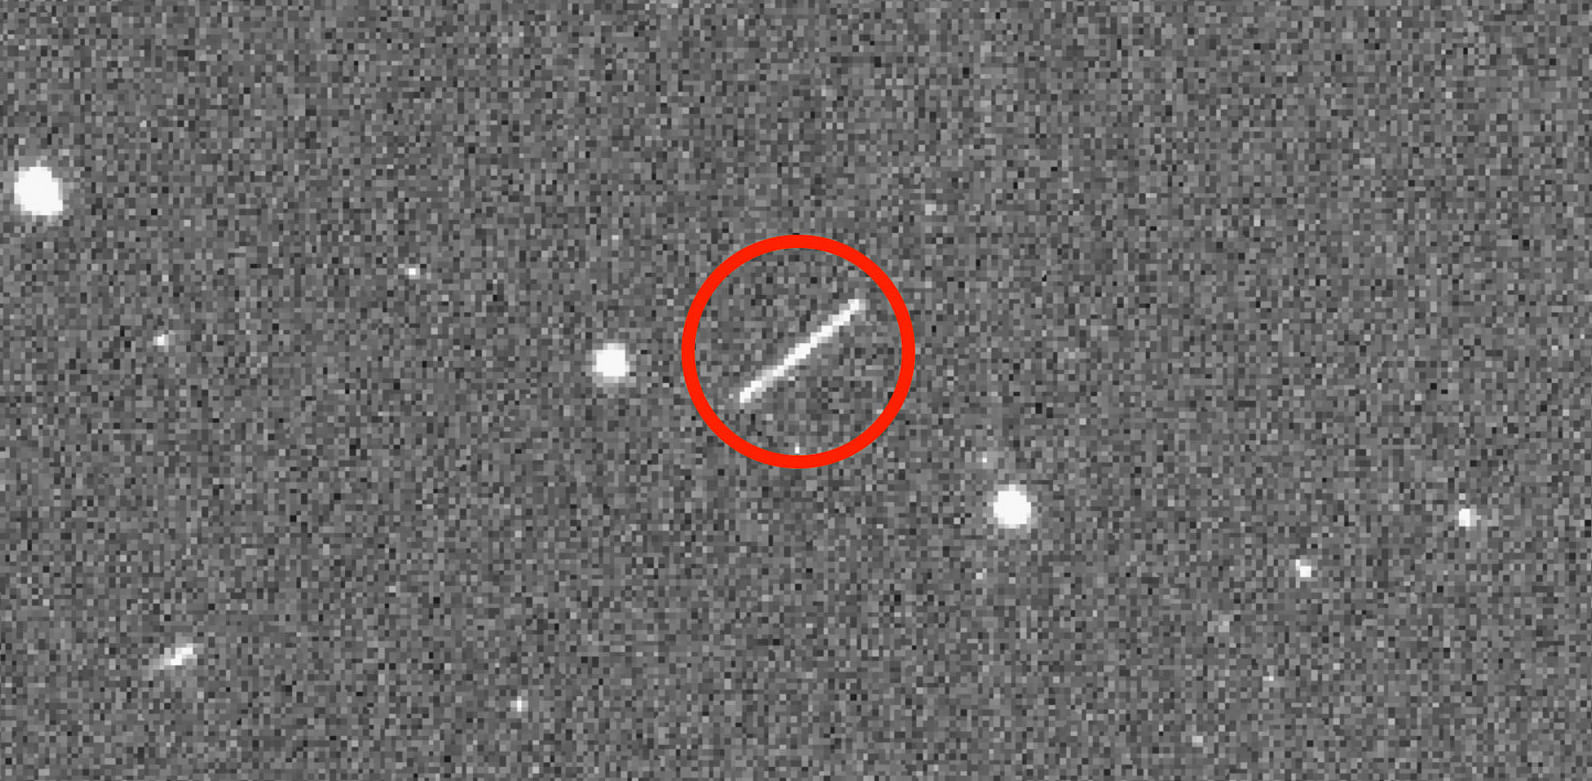 This NASA/JPL/ZTF/Caltech Optical Observatories handout image obtained on August 18, 2020 shows asteroid 2020 QG (the circled streak in the center) which came closer to Earth than any other nonimpacting asteroid on record. It was detected by the Zwicky Transient Facility on Sunday, Aug. 16 at 12:08 a.m. EDT (Saturday, Aug. 15 at 9:08 p.m. PDT). Credit: AFP